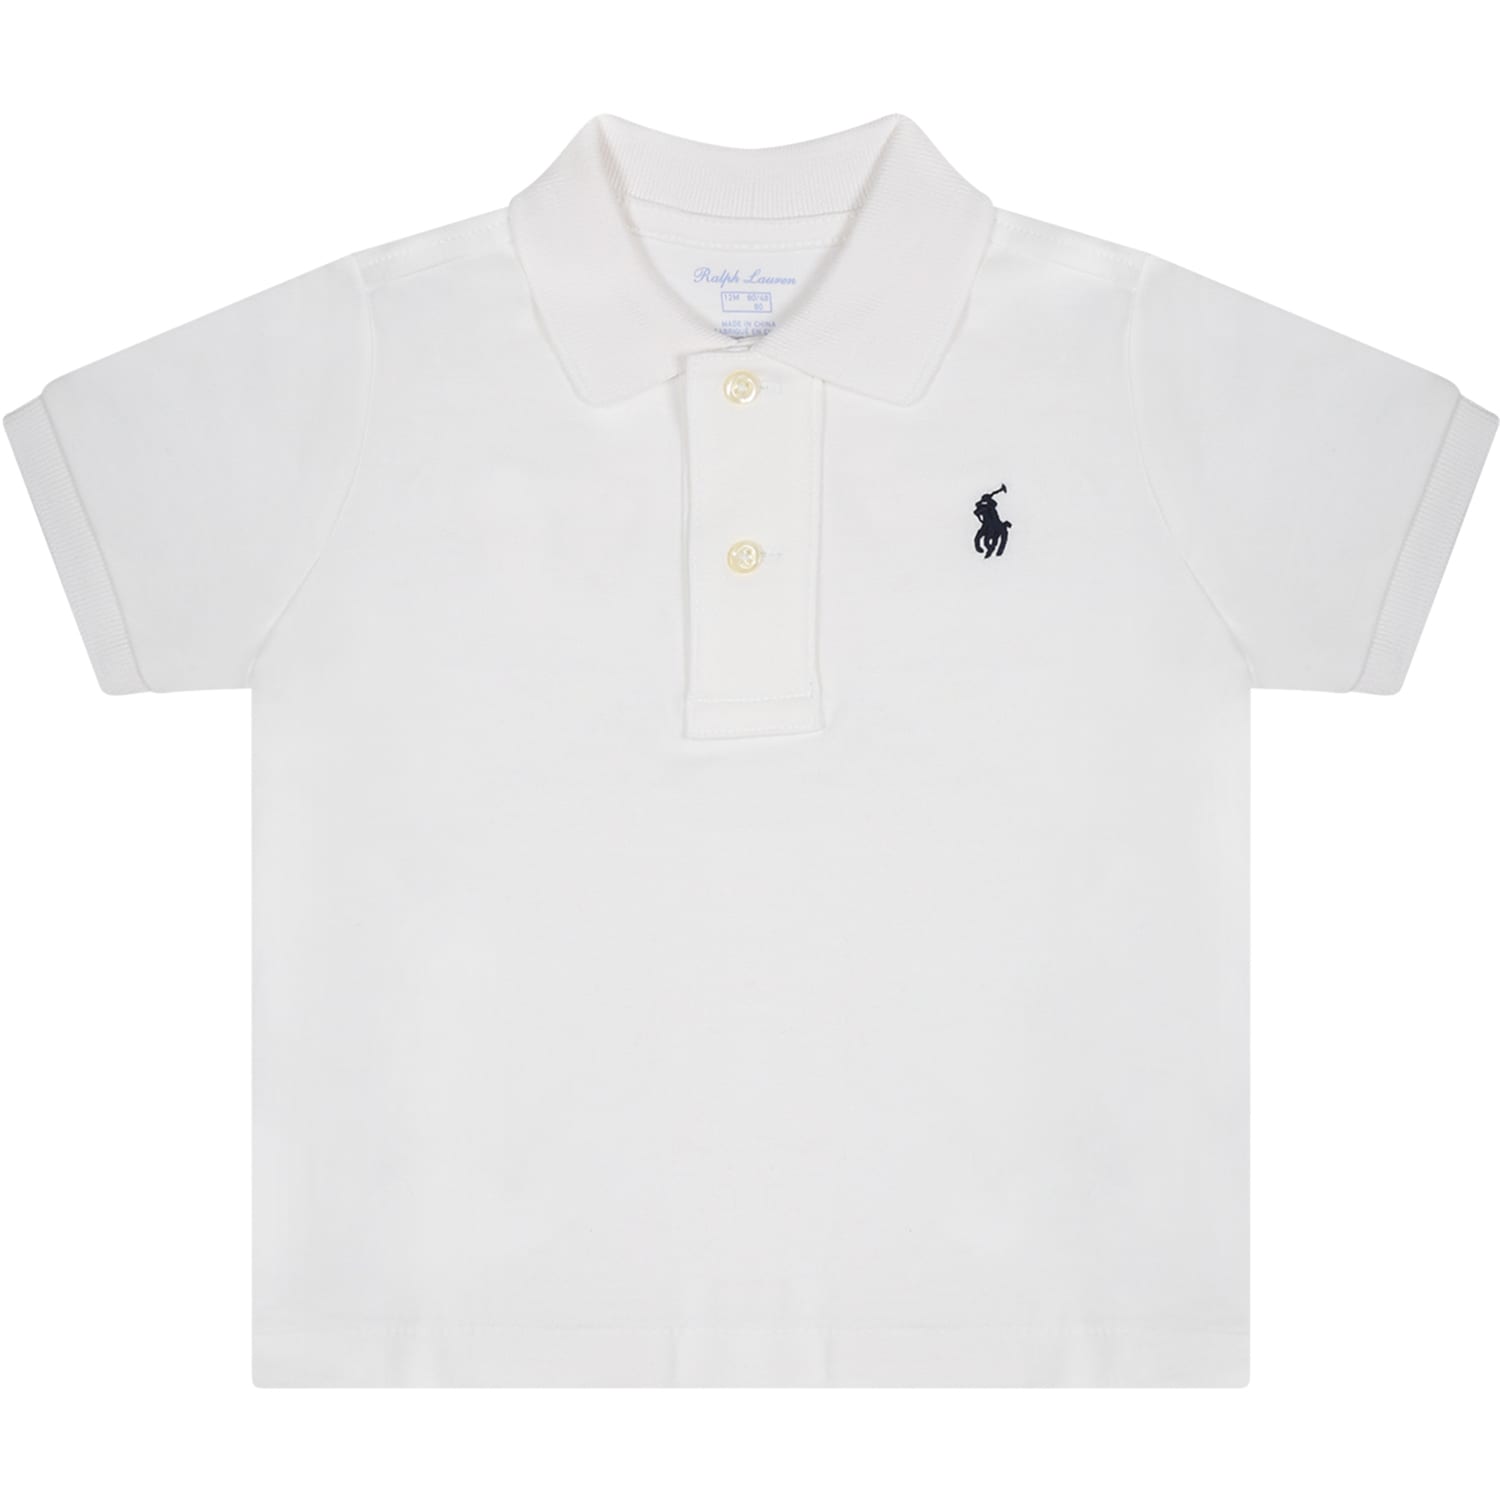 Ralph Lauren White Polo-shirt For Baby Boy With Iconic Pony